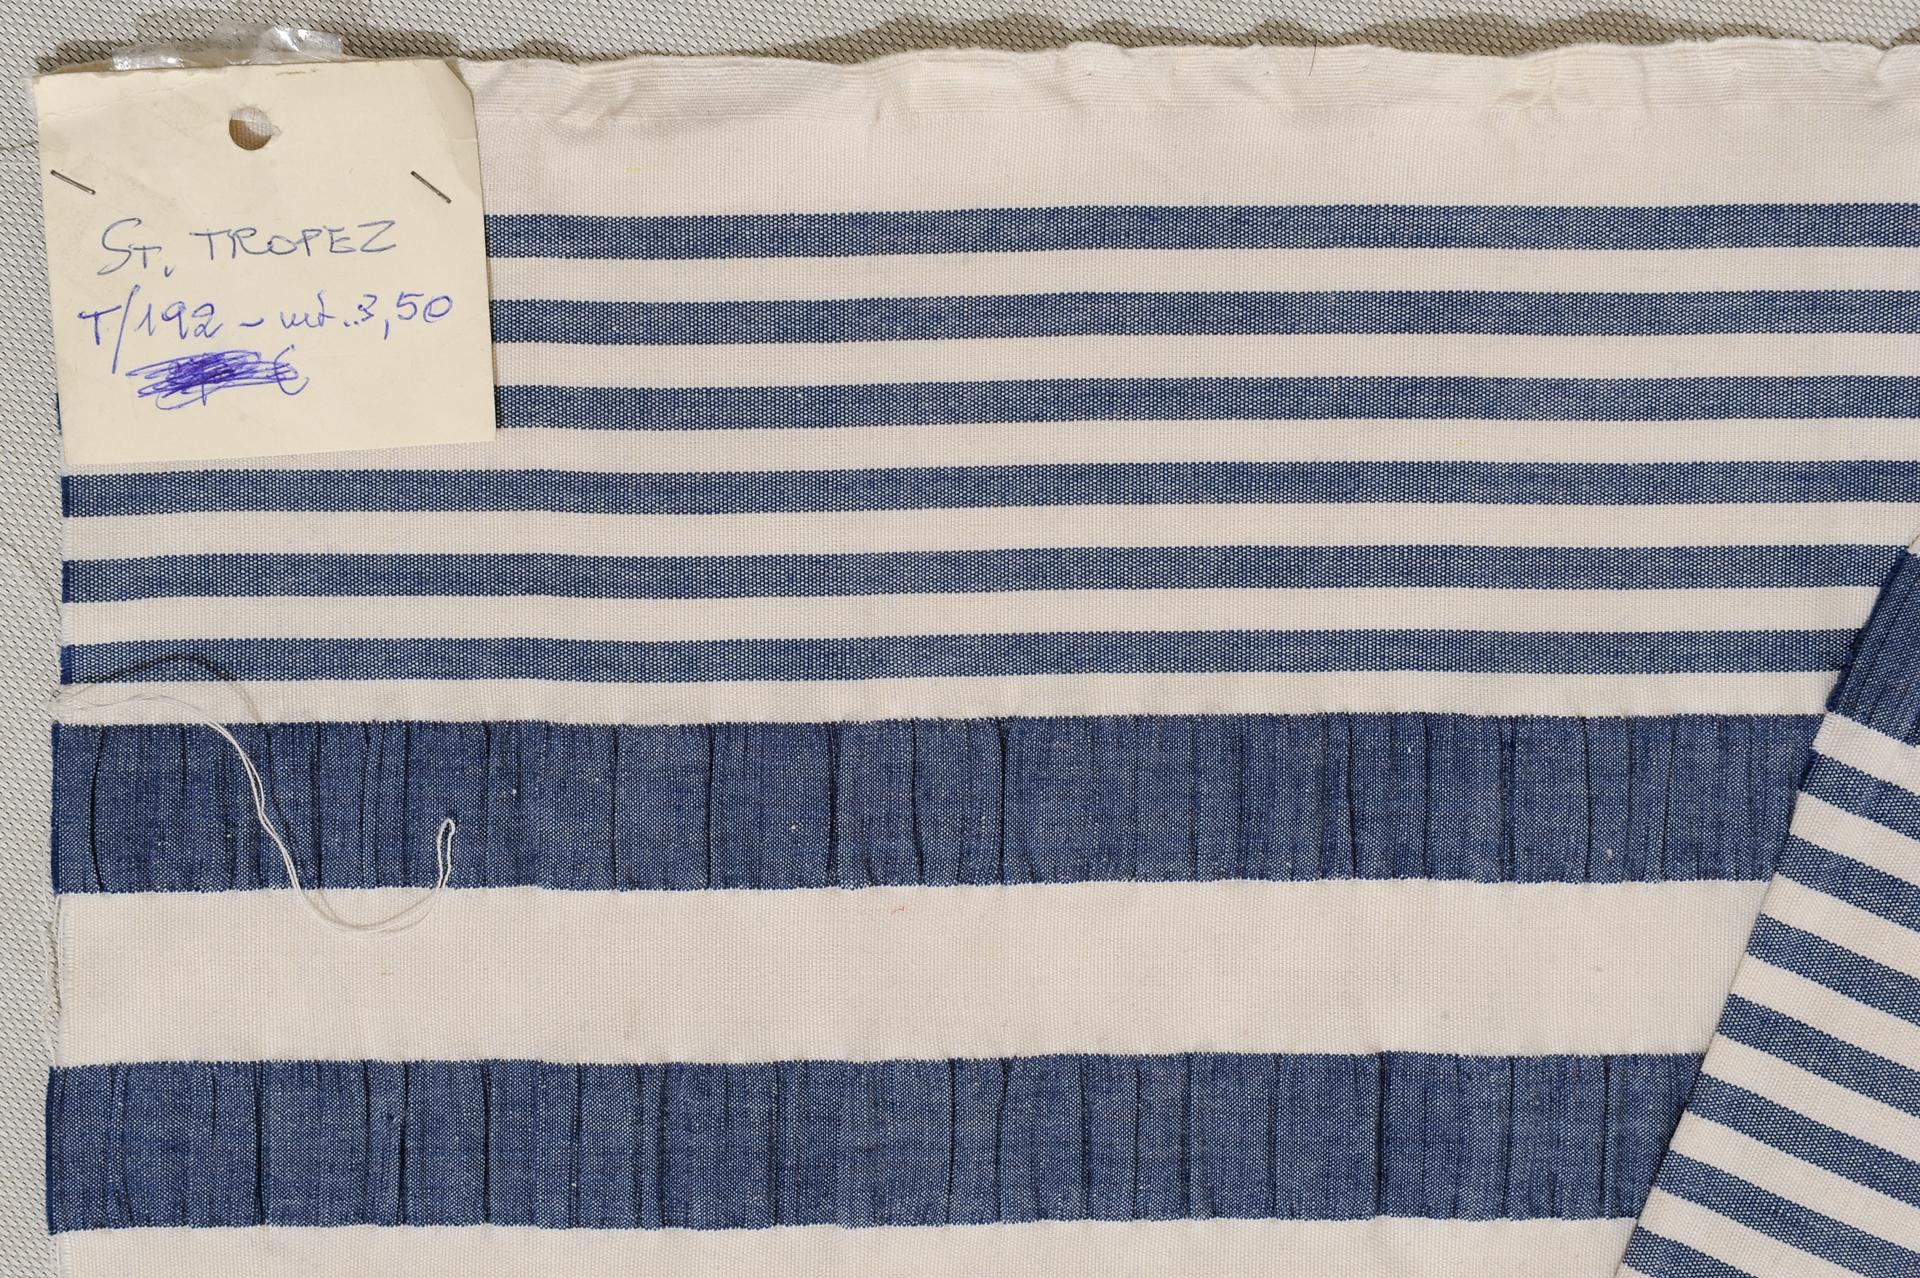 Blue and white striped cotton Navy: if You wish to bring a seaside holiday air into Your home.
That's a Mulberry - St.Tropez: the name of this tissue !
I ACCEPT OFFERS